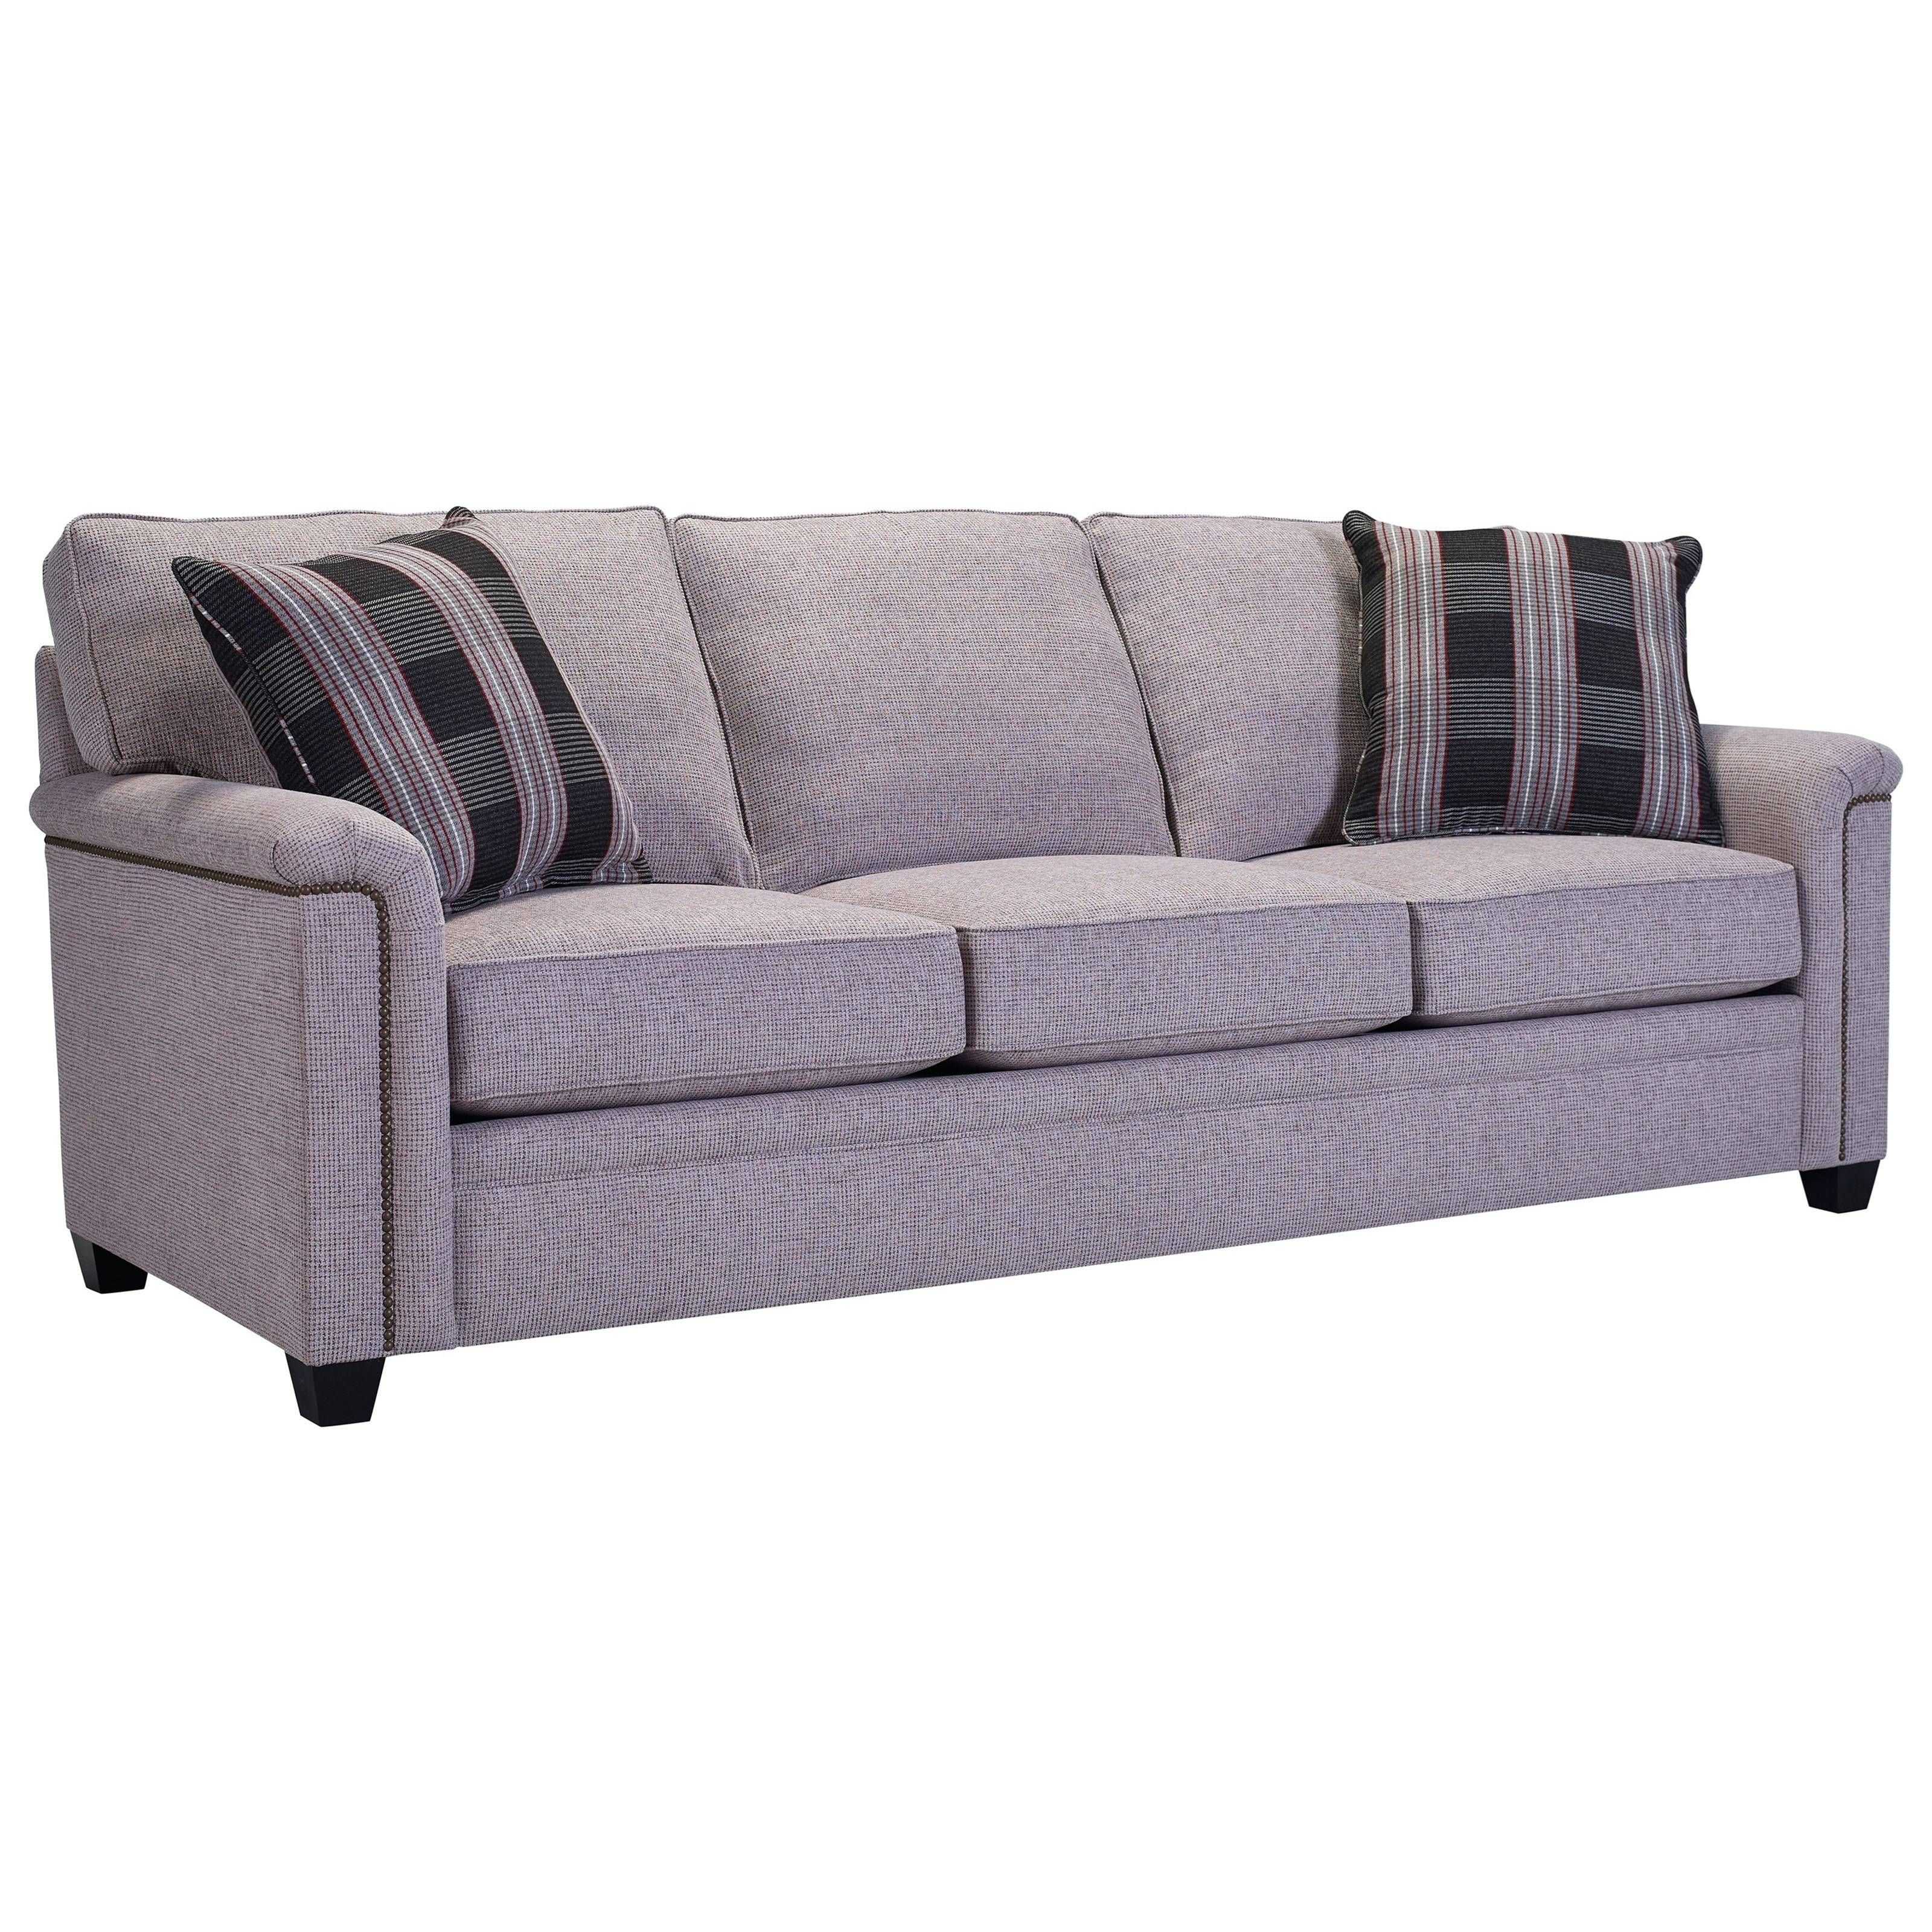 Broyhill Furniture Warren Sofa With Nailhead Trim Accents With Broyhill Sectional Sofa (View 24 of 30)